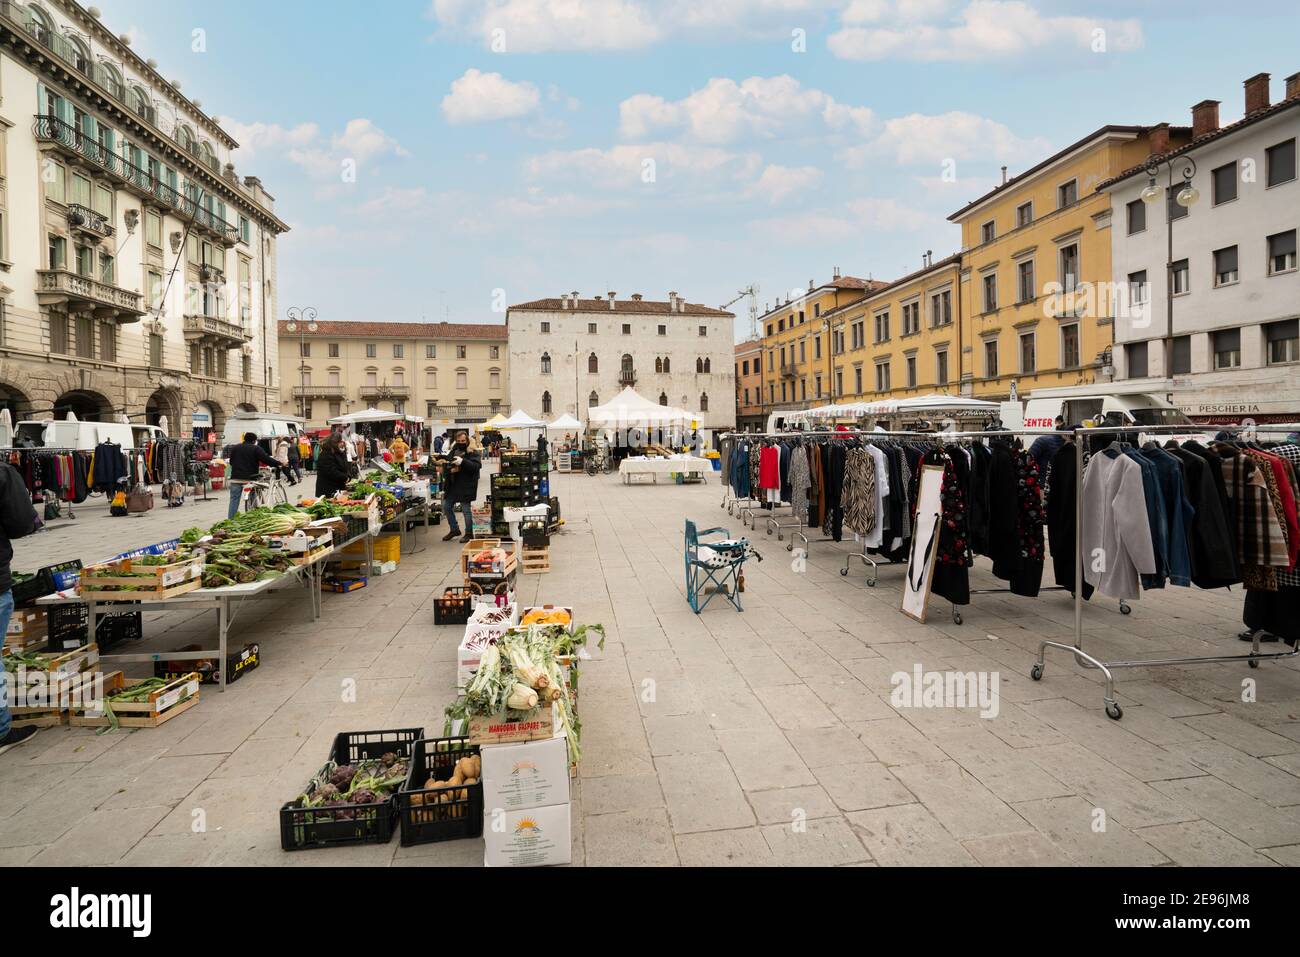 Udine, Italy. February 2 2021.  the open-air market in piazza 20 settembre in the historic center of Udine Stock Photo